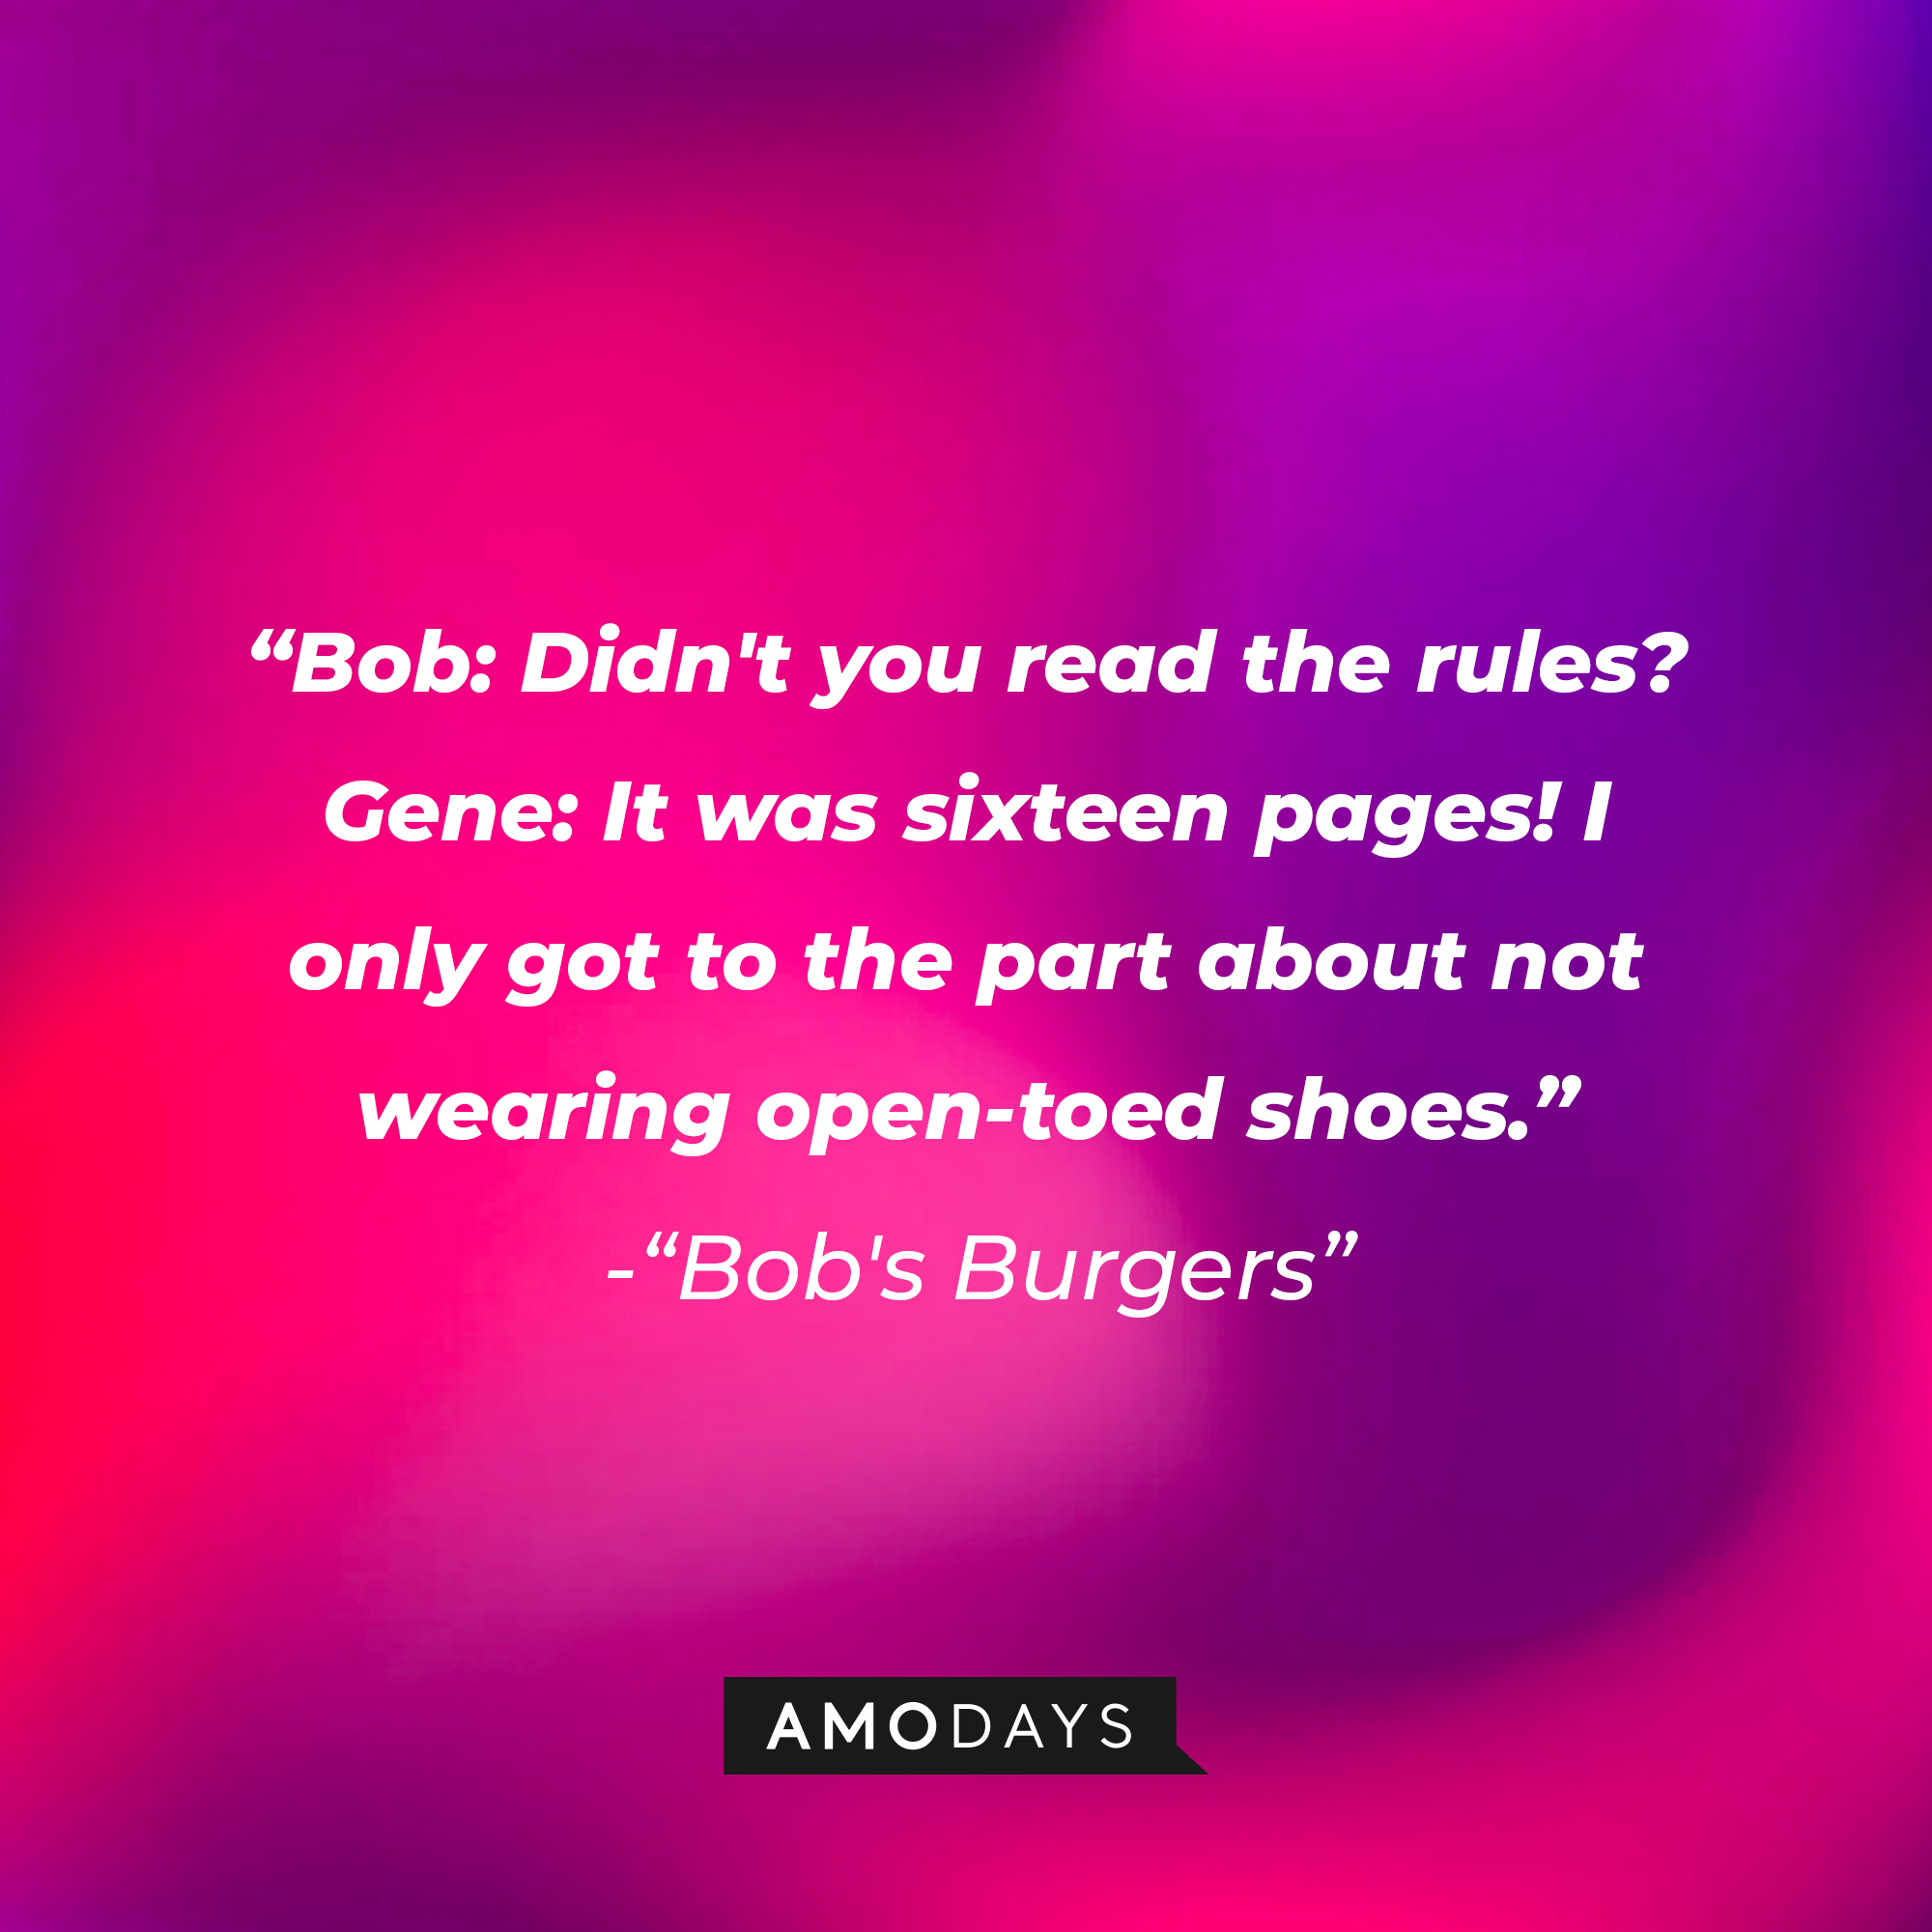 "Bob's Burgers" dialogue: "Bob: Didn't you read the rules? Gene: It was sixteen pages! I only got to the part about not wearing open-toed shoes." | Source: Amodays